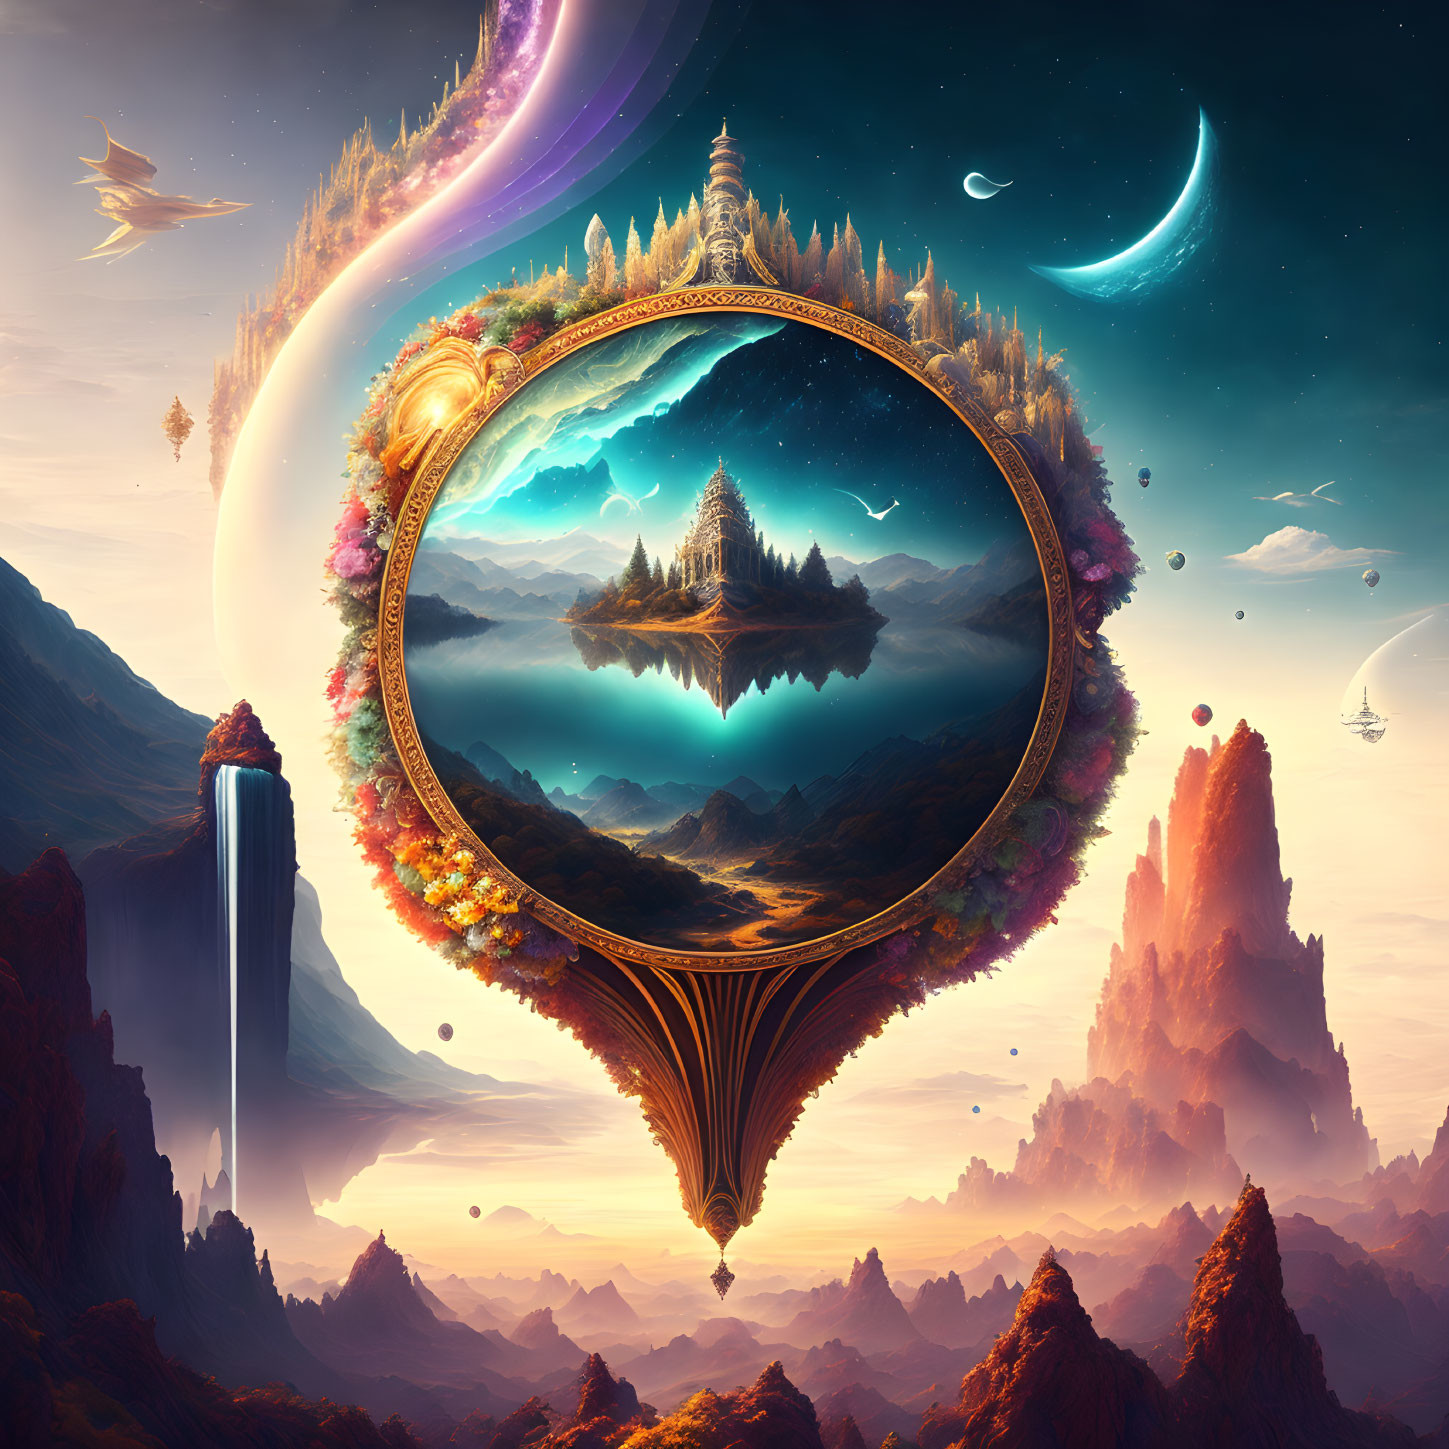 Surreal Landscape with Floating Islands and Mirror Portal